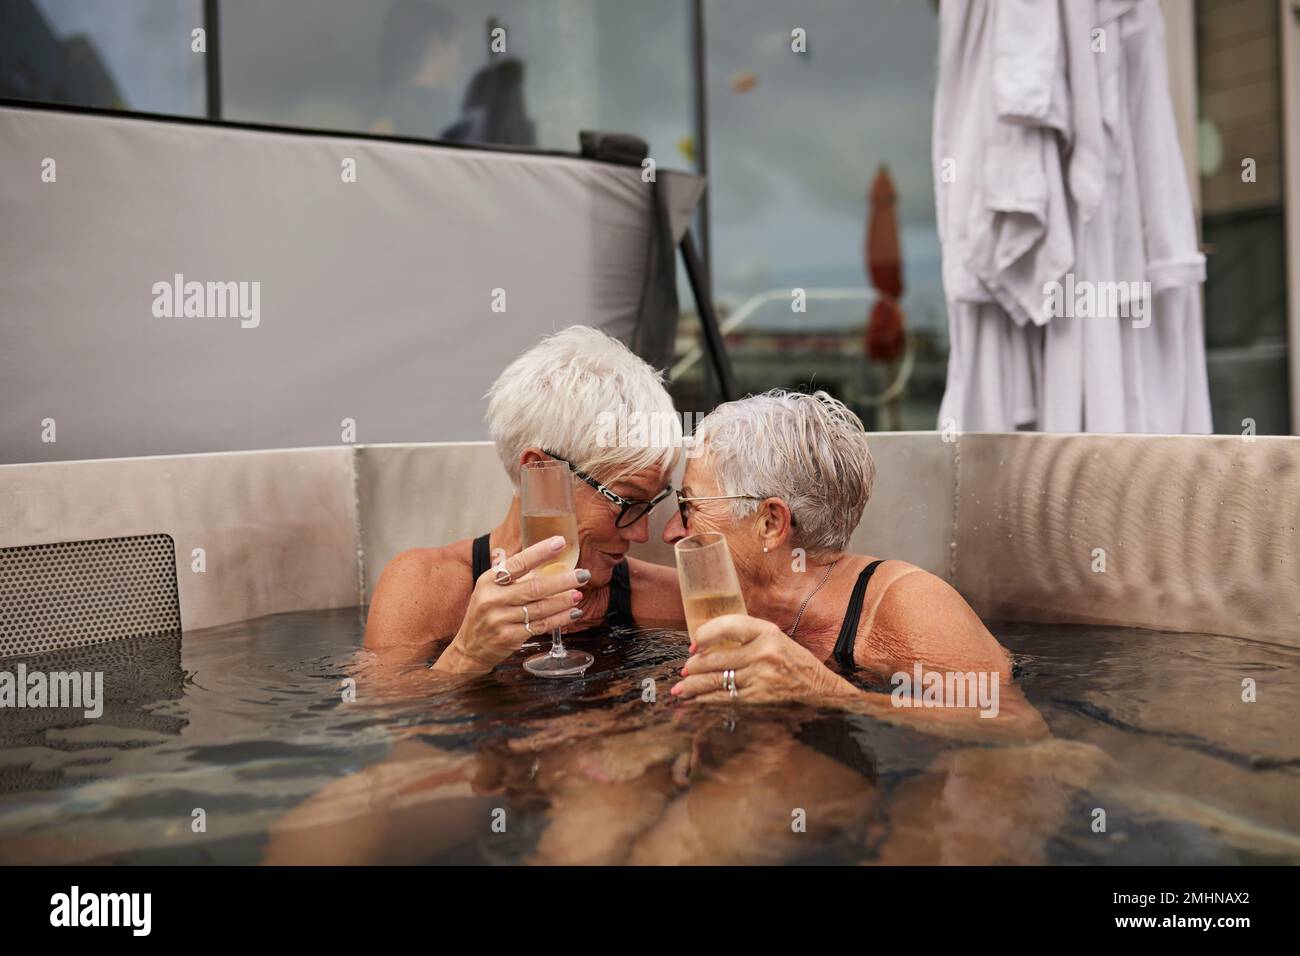 Senior Portrait Smiling 70 Years Old Woman With 73 Years Old Husband In Hot  Tub Stock Photo - Download Image Now - iStock